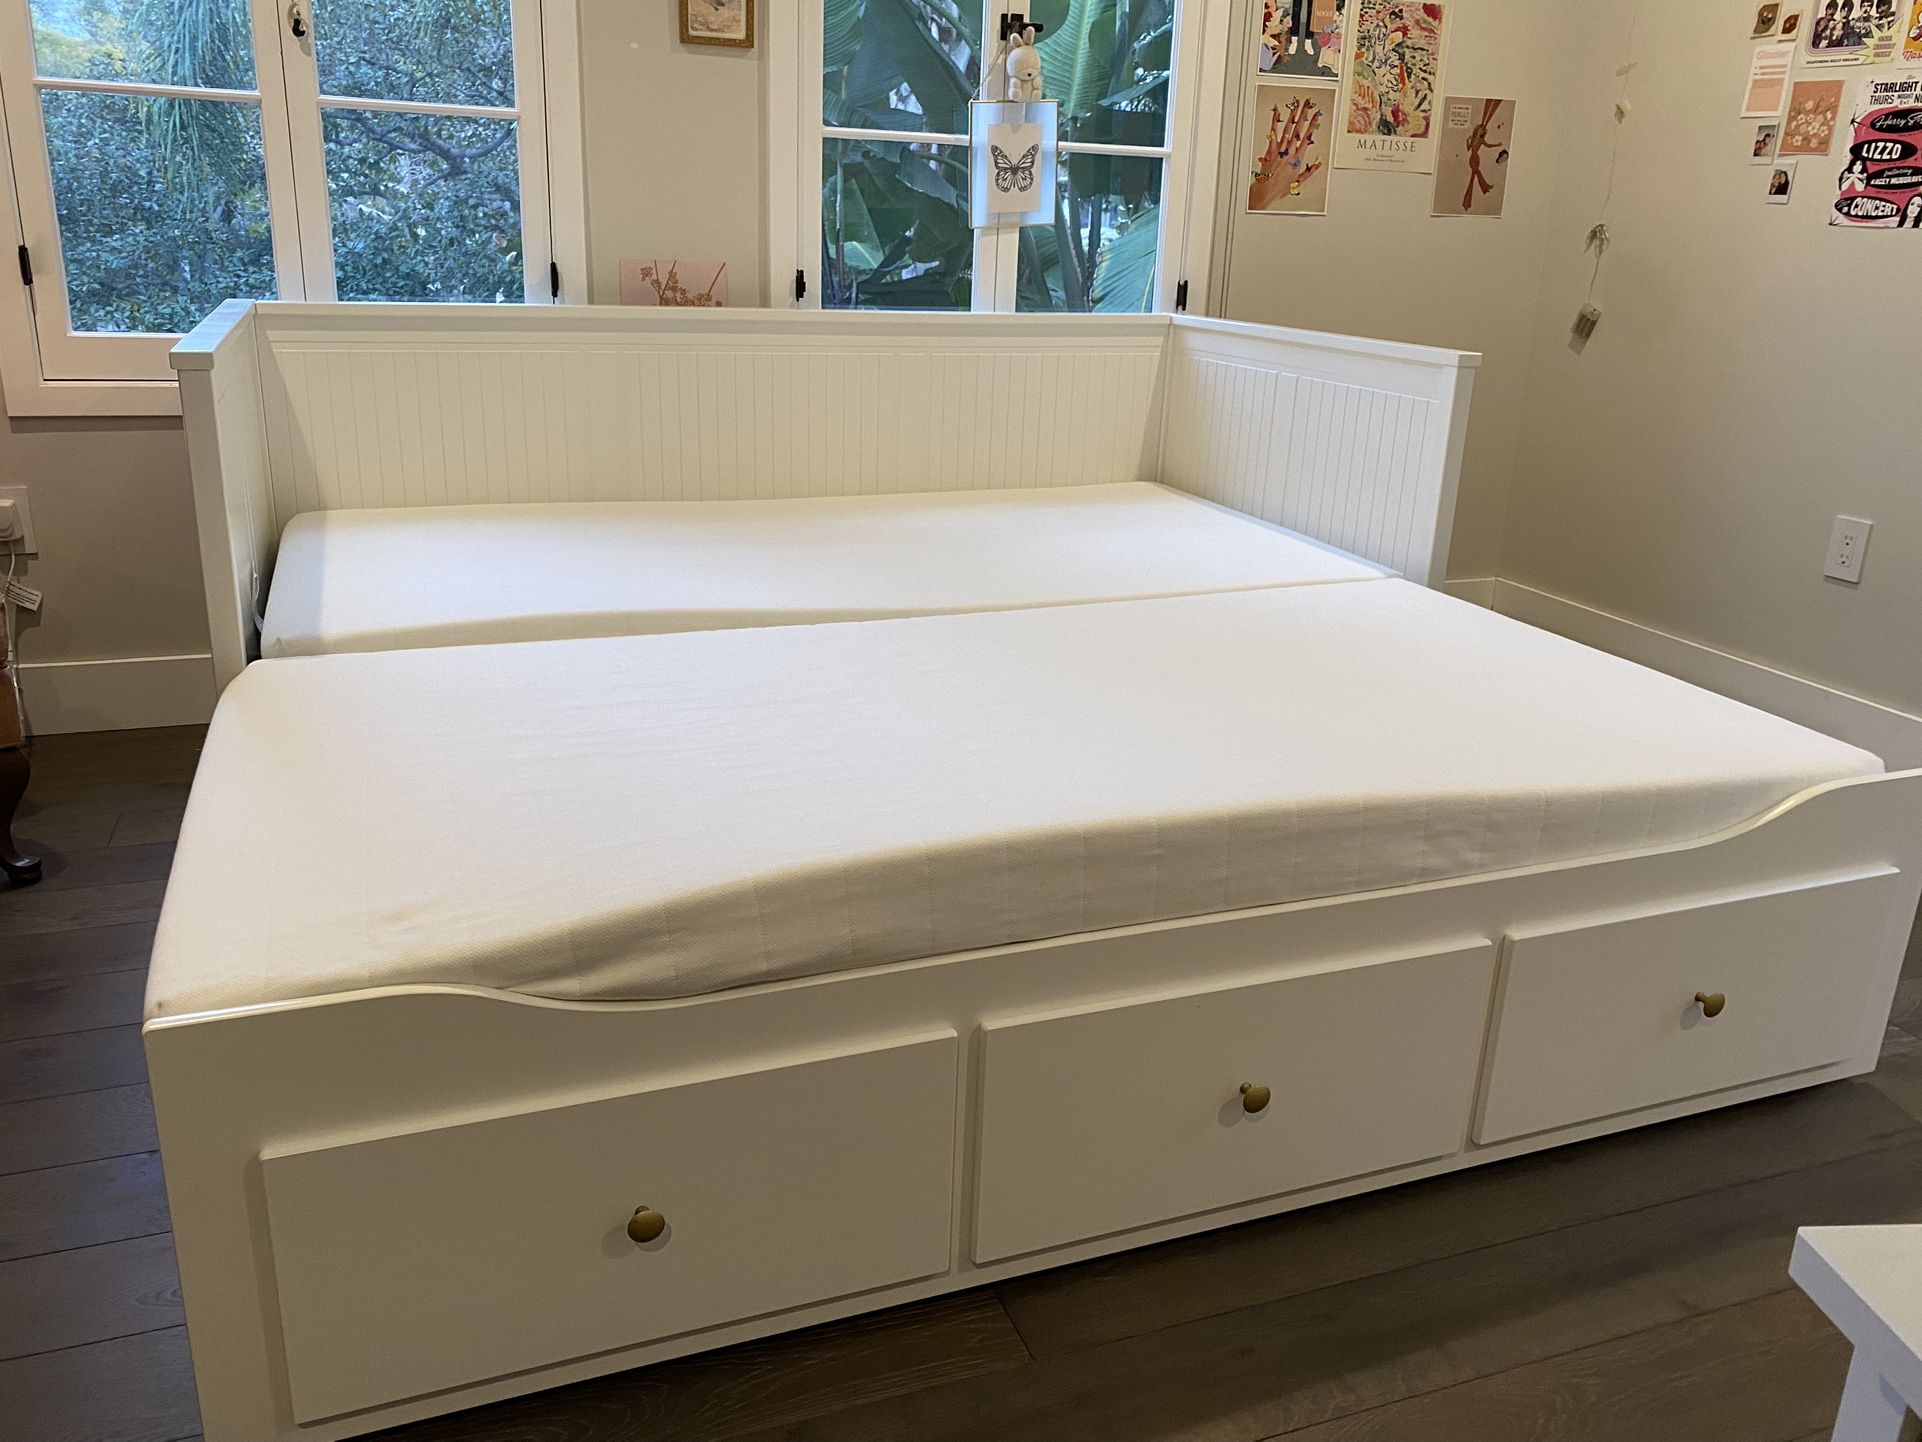 Ikea Virgil Abloh Markerad daybed & Morgedal mattress for Sale in Santa  Monica, CA - OfferUp